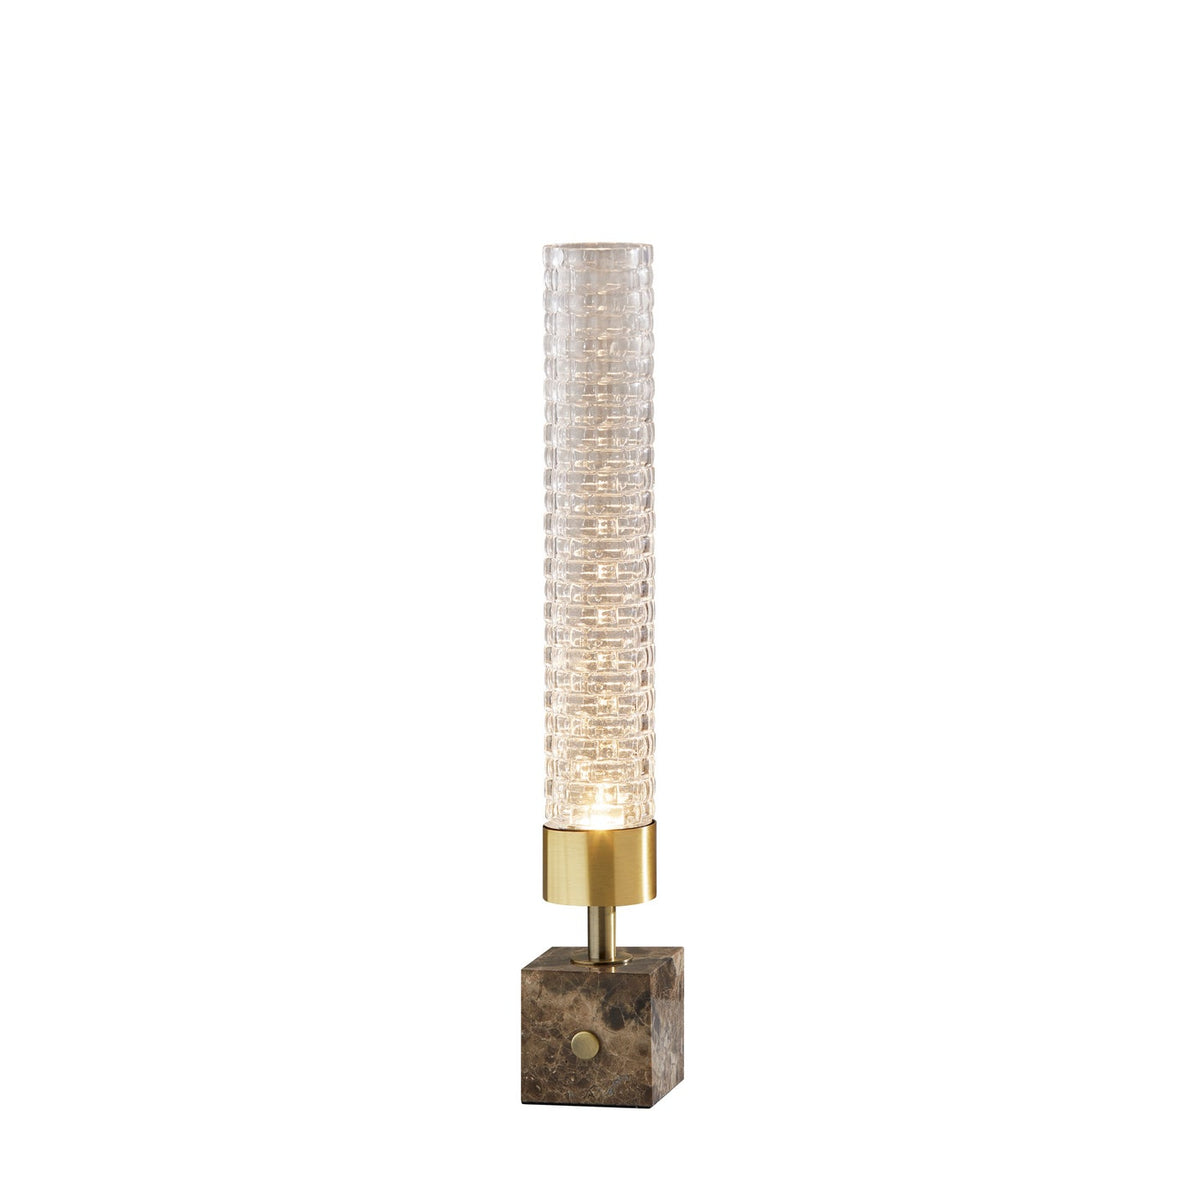 Adesso Home - 3697-21 - LED Table Lamp - Harriet - Antique Brass